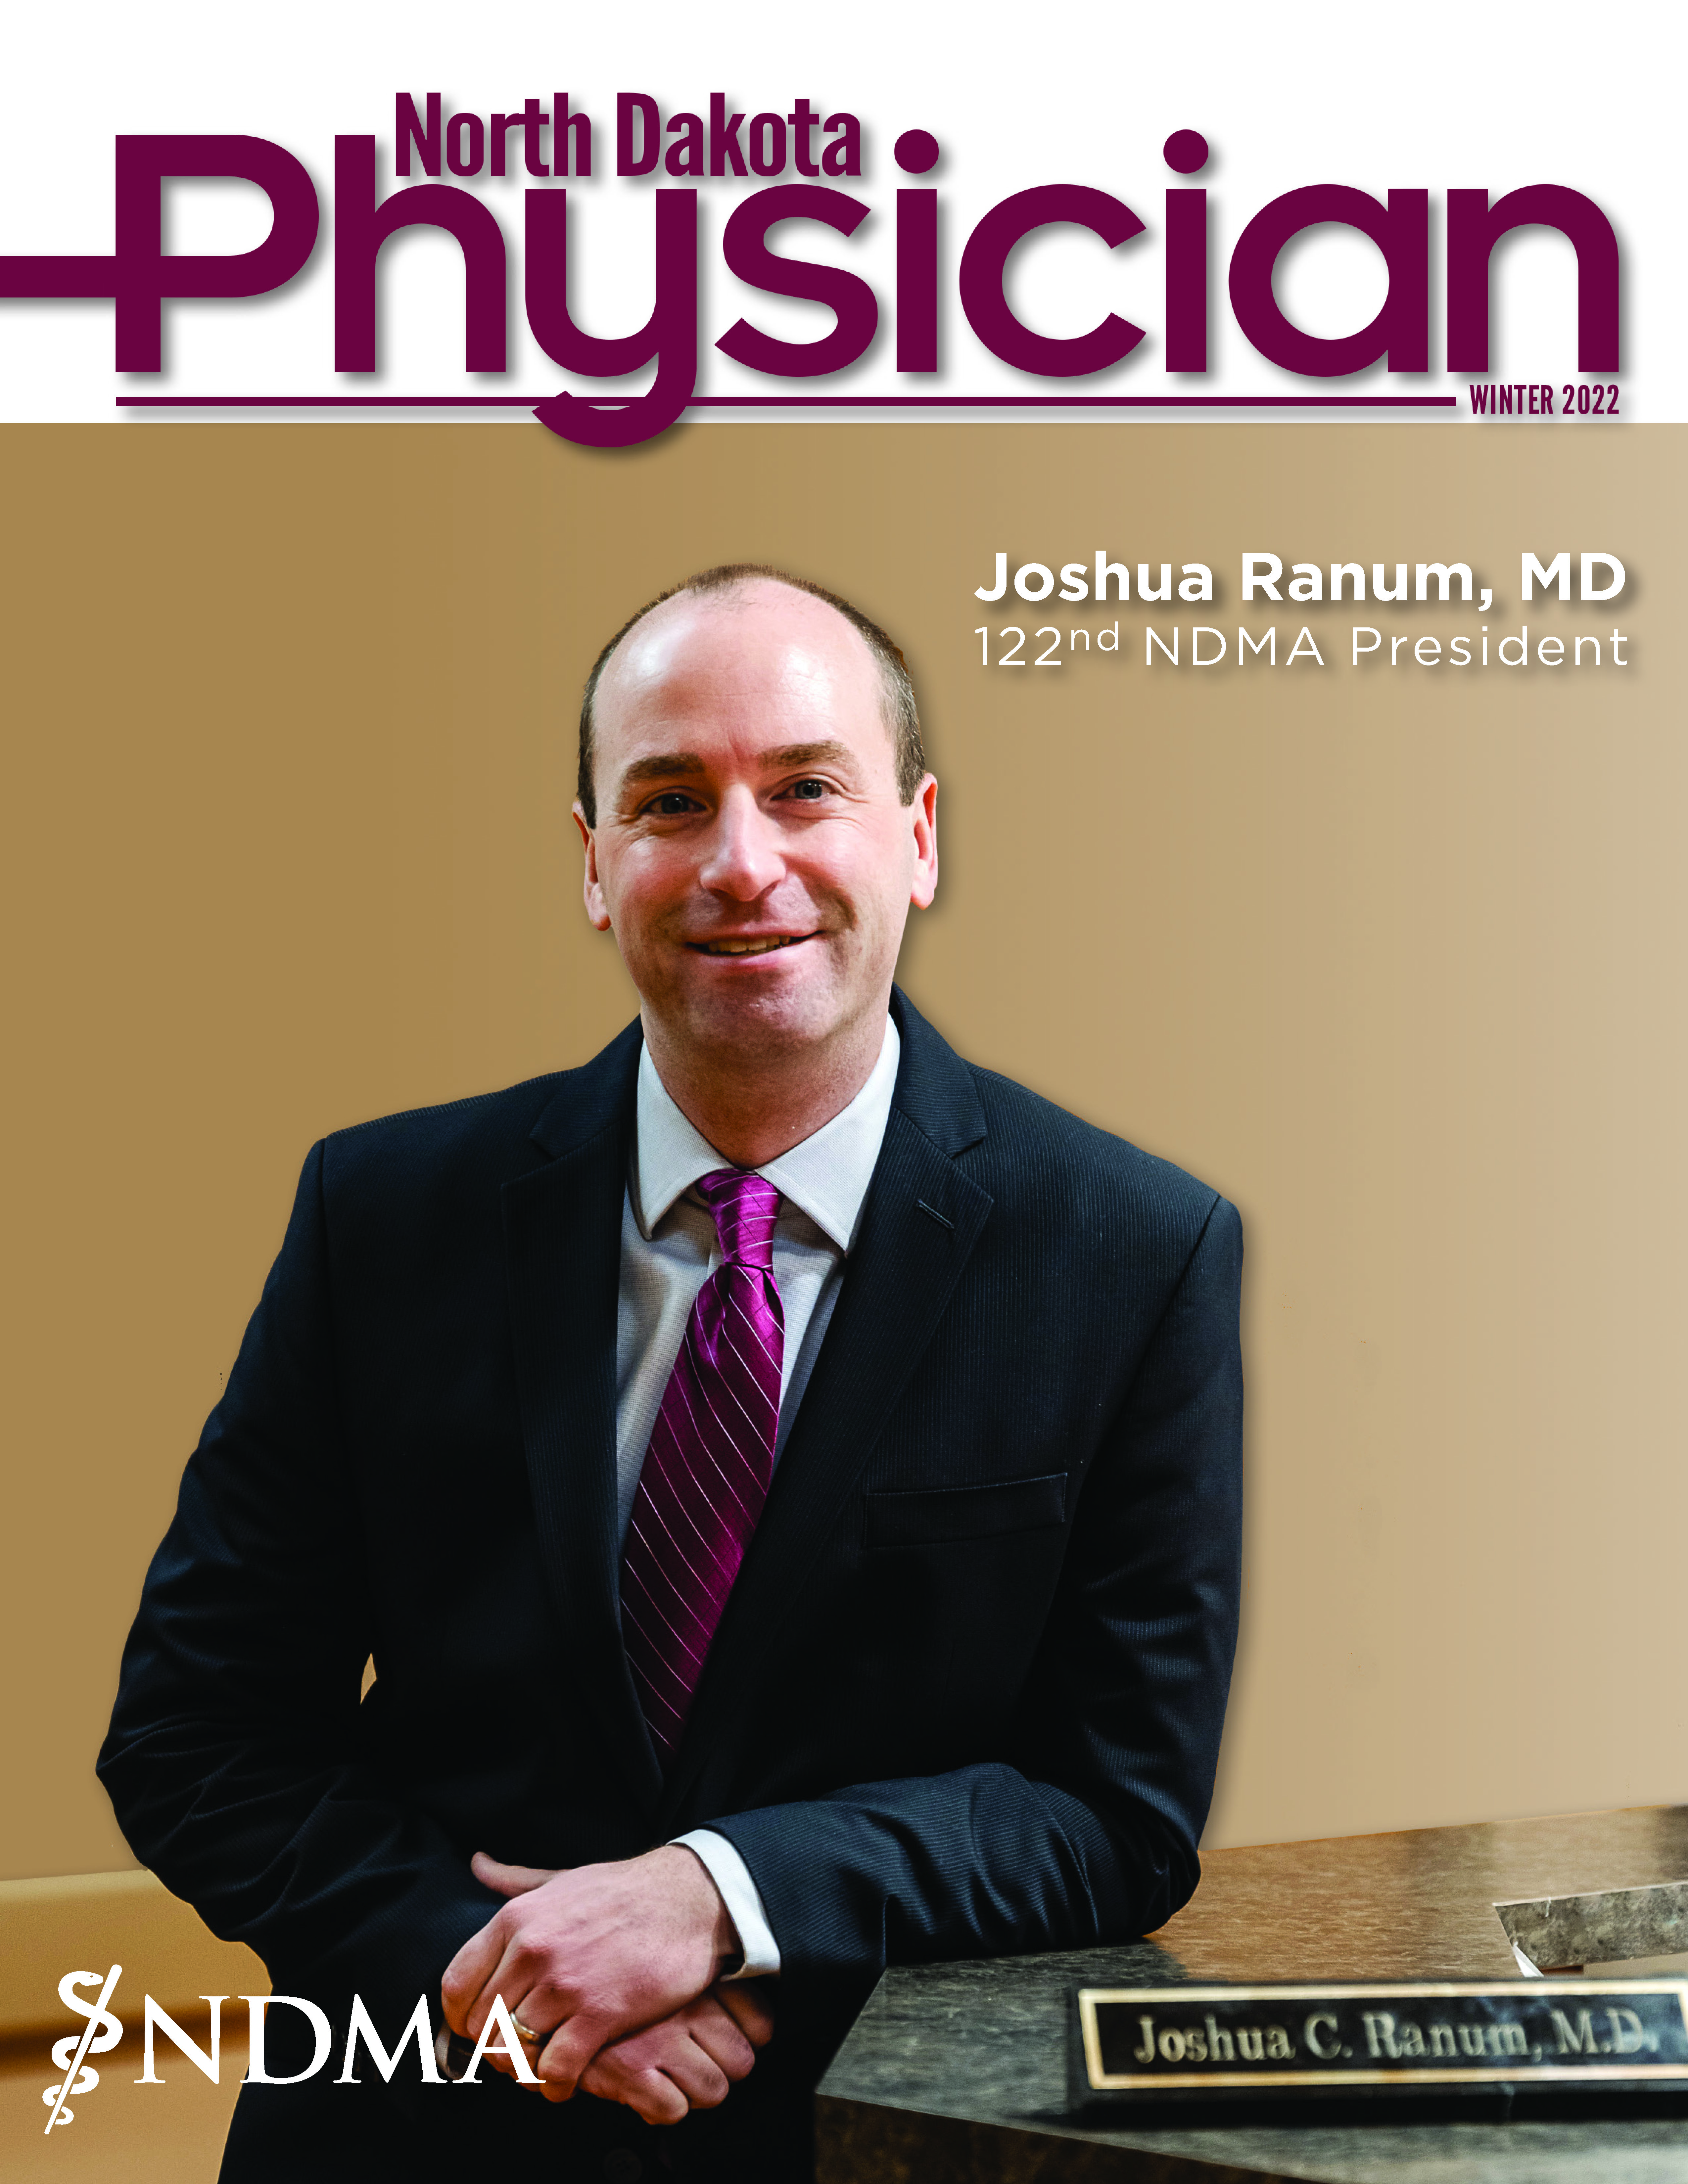 ND Physician Winter 2022 magazine cover